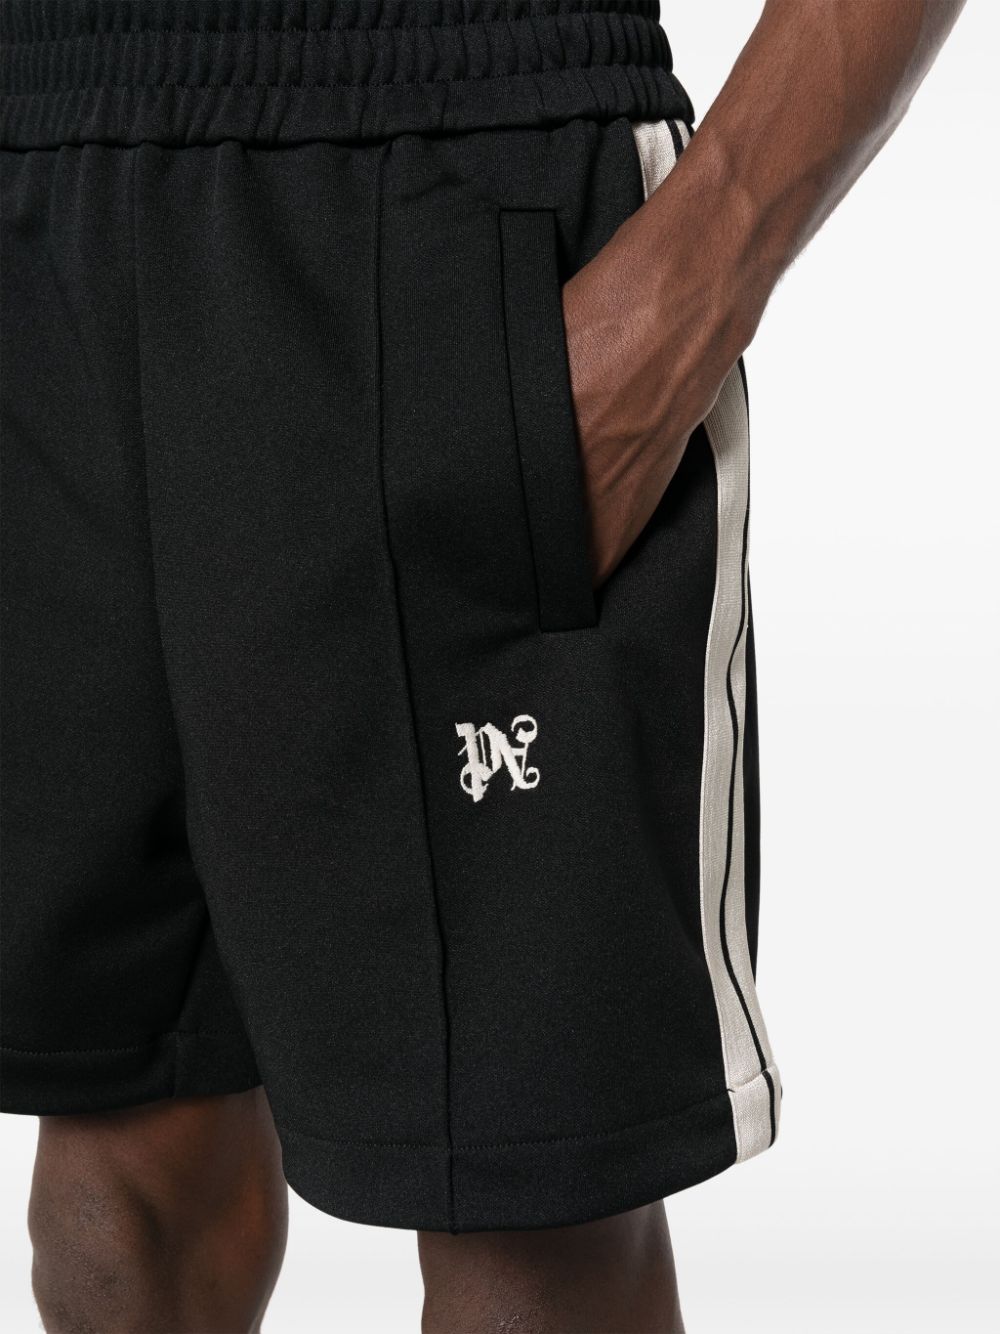 Embroidered logo to the side shorts